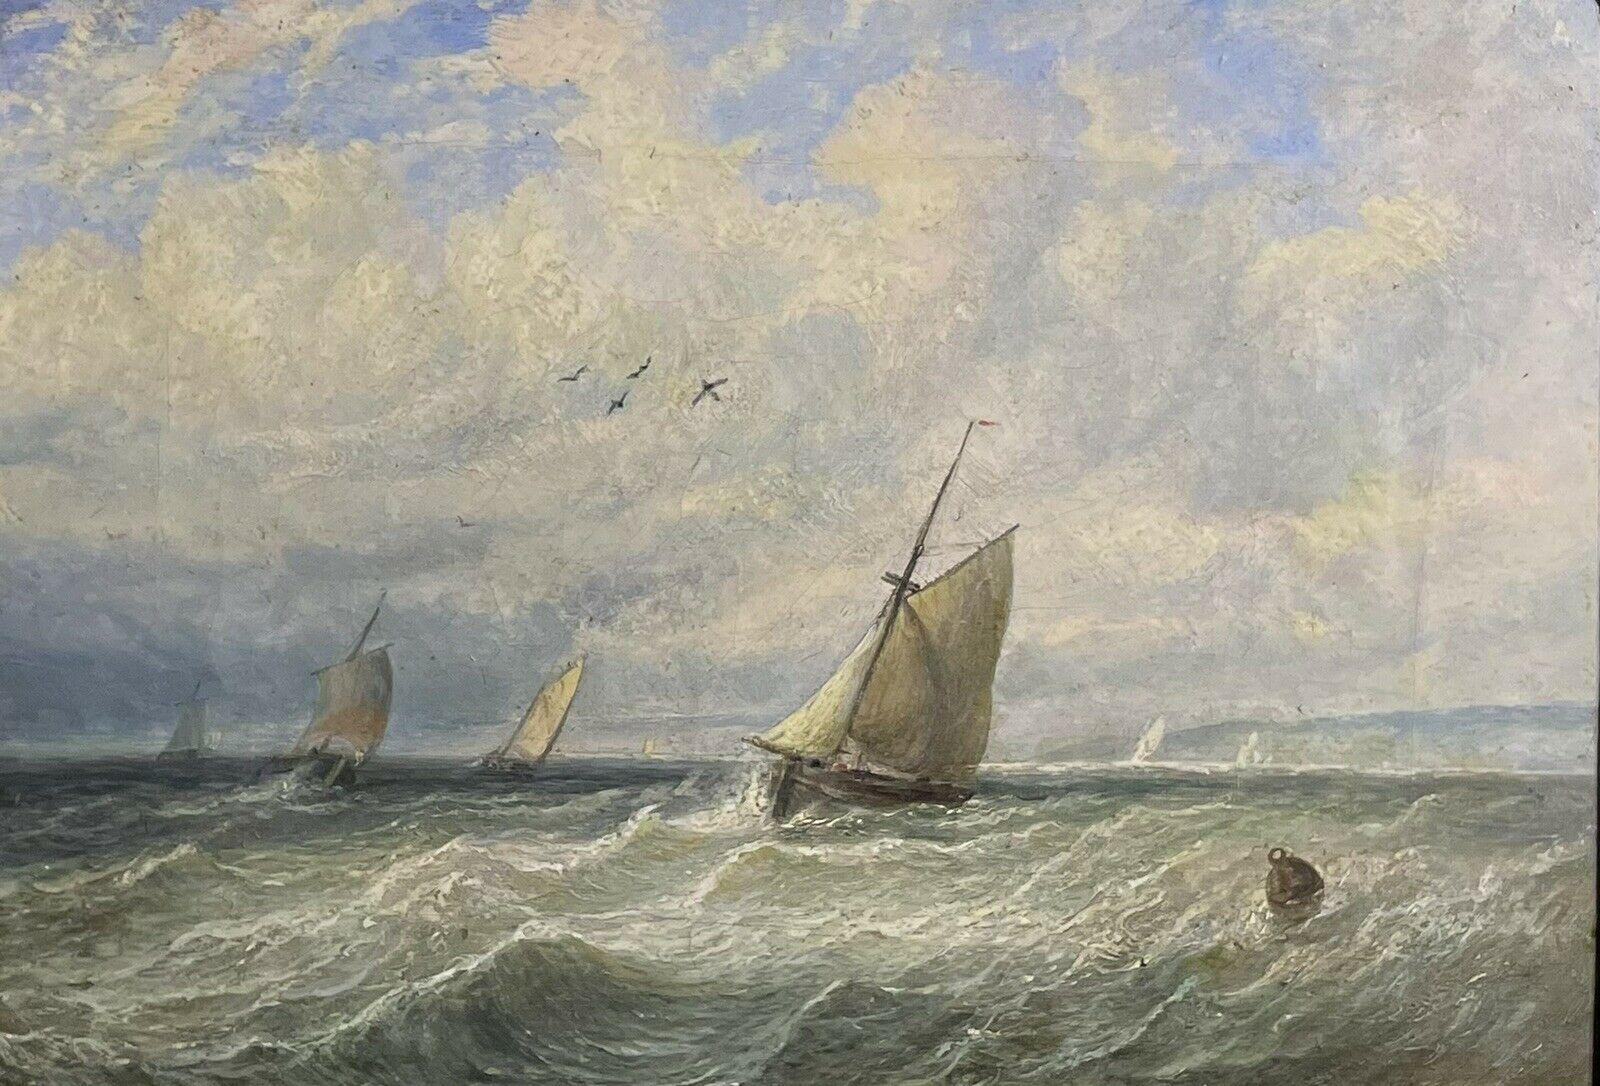 Victorian English Landscape Painting - 19th Century English Marine Oil Painting Fishing Boats at Sea off Coastline